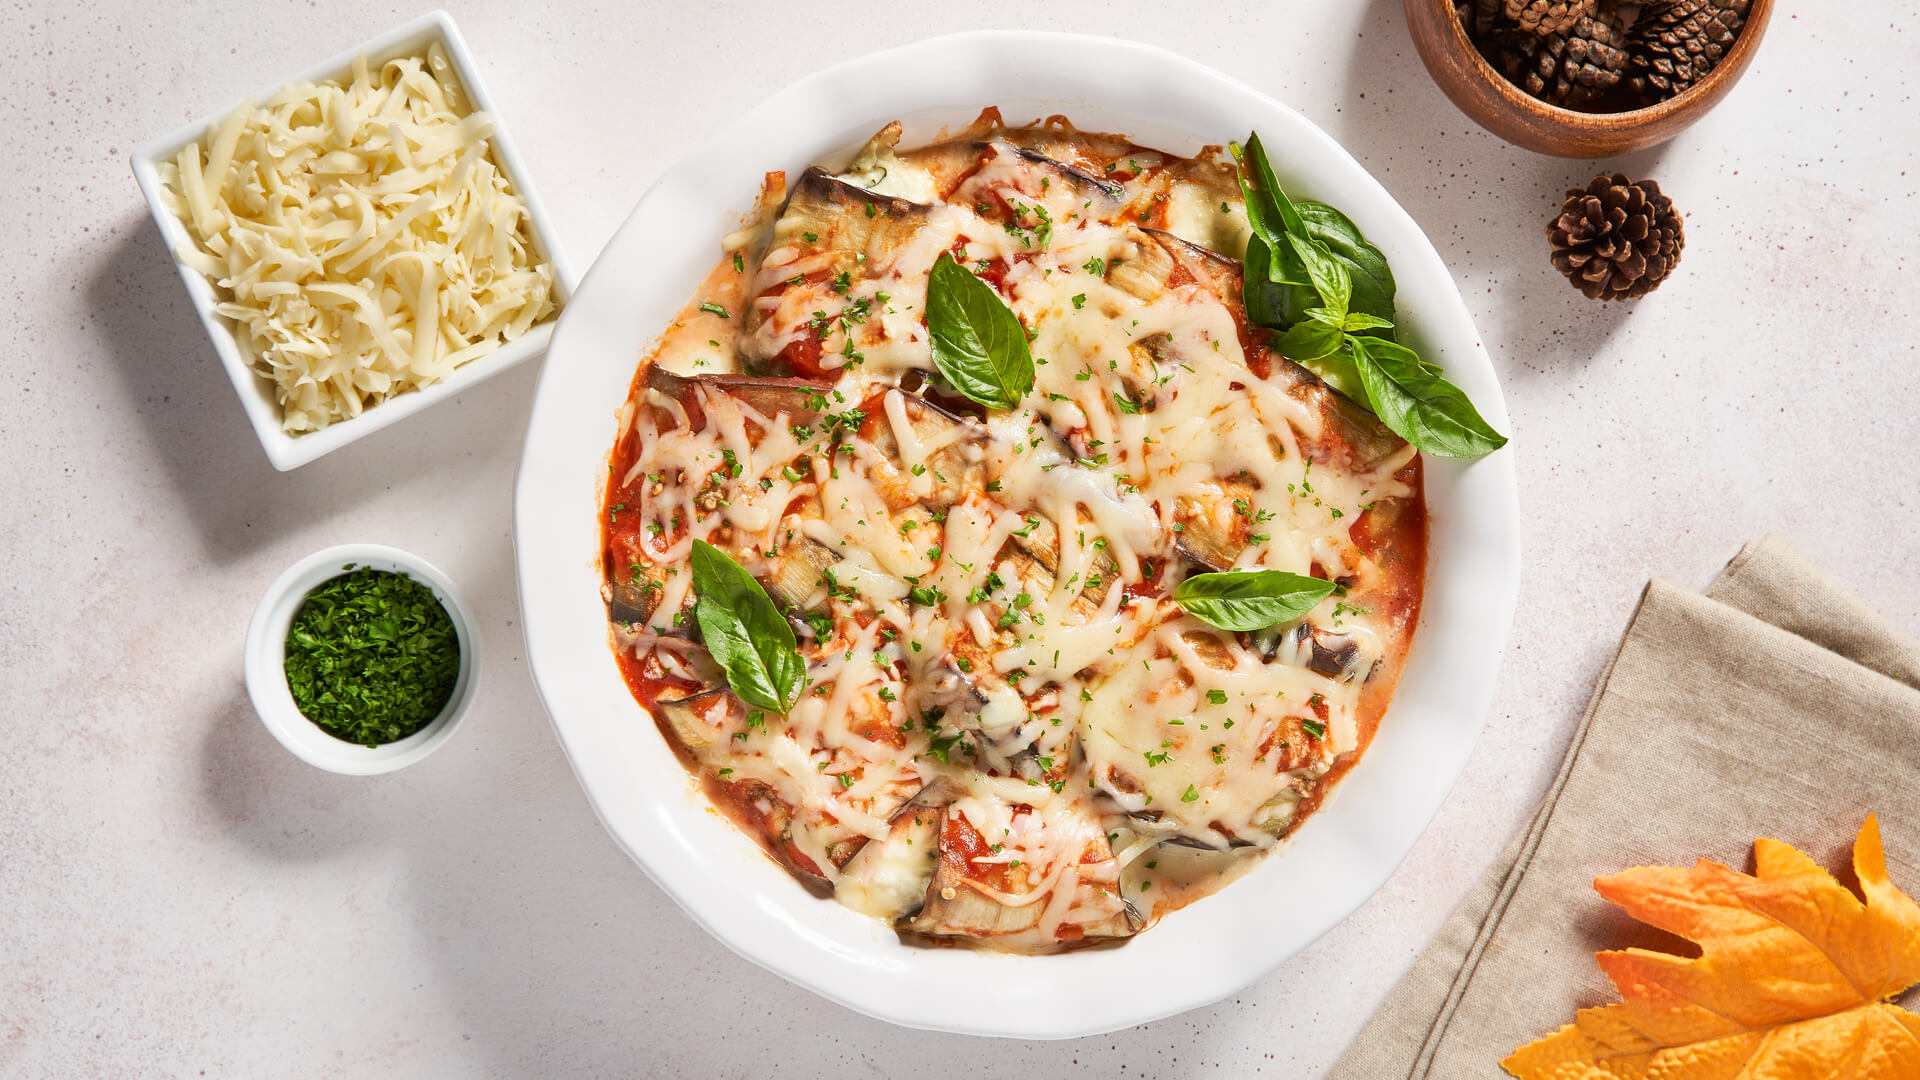 Casserole dish with eggplant, cheese and tomato sauce served with shredded cheddar and herbs